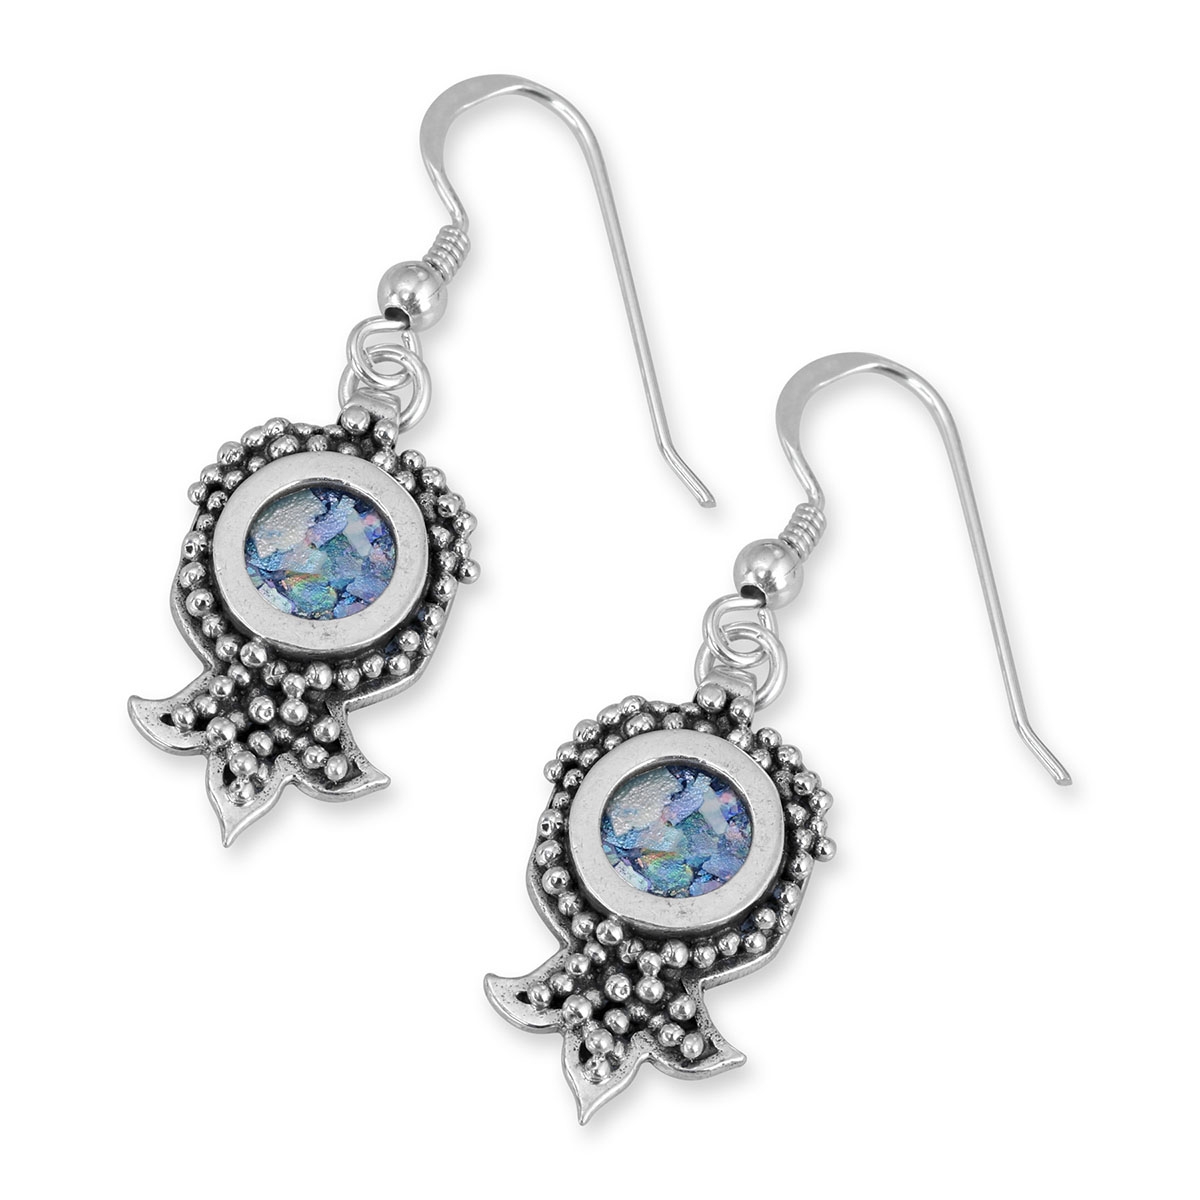 Rafael Jewelry Roman Glass and Sterling Silver Pomegranate Earrings - 2